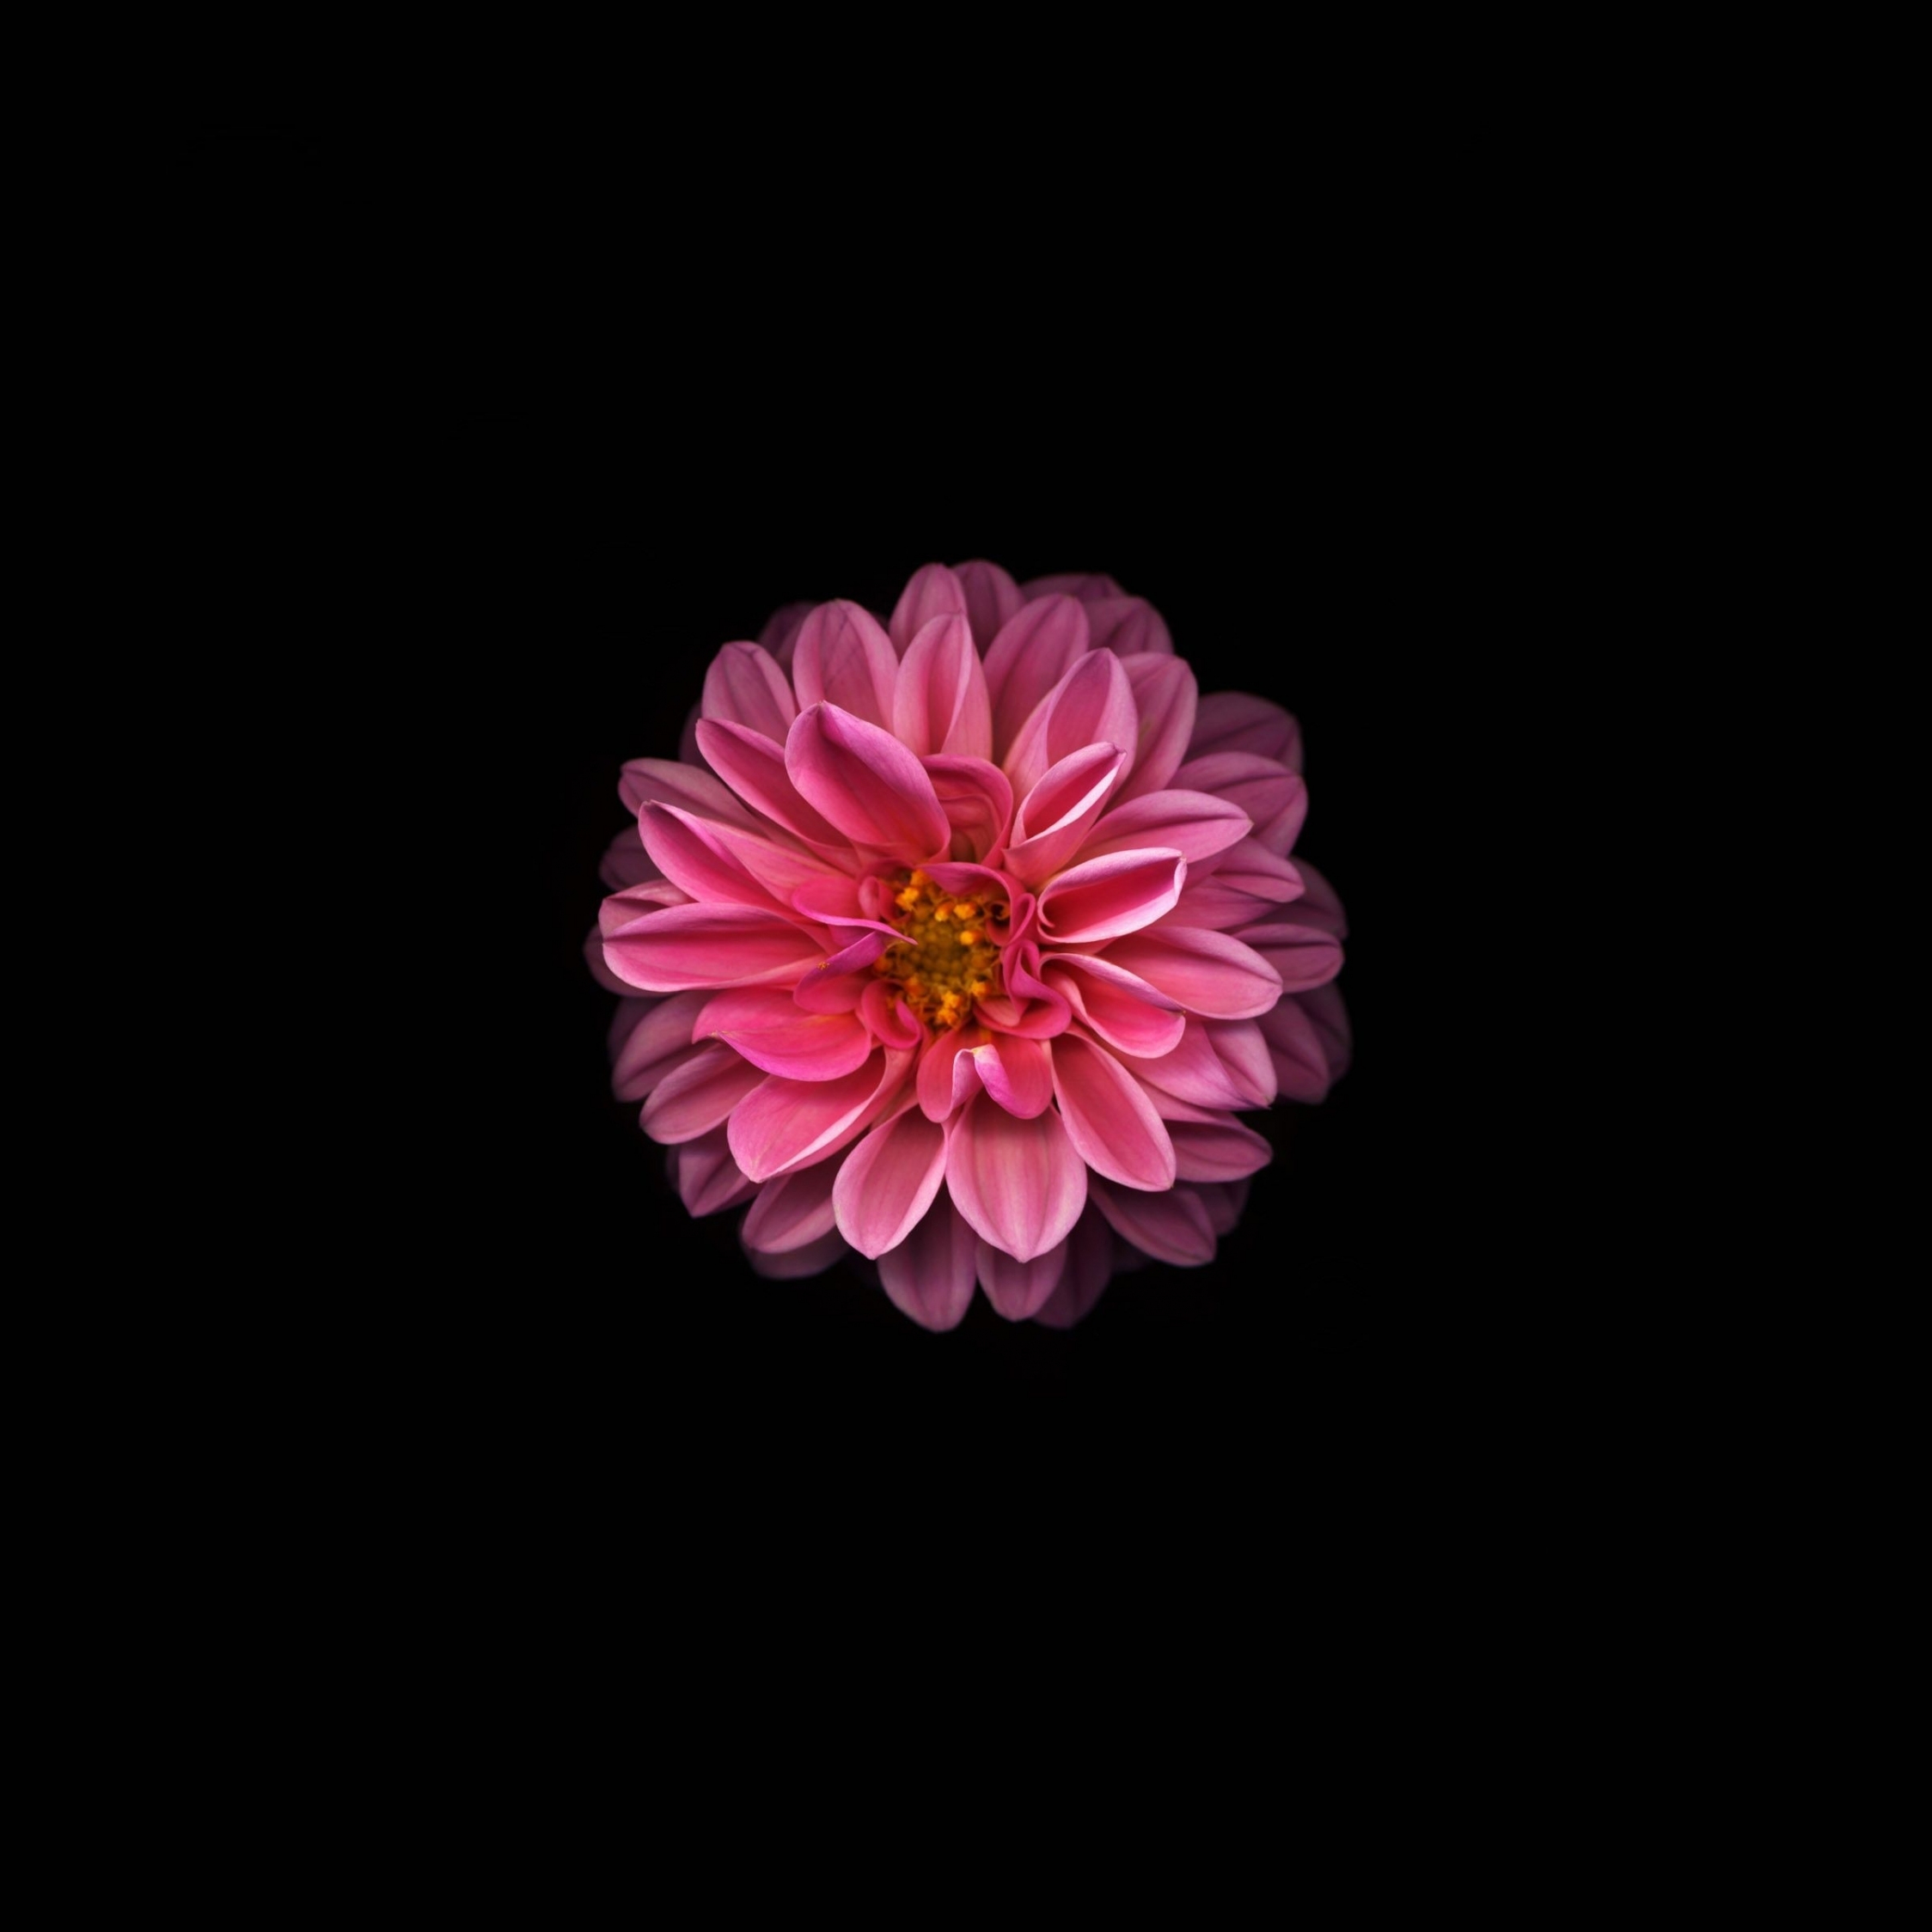 Download wallpaper 2248x2248 pink dahlia, minimal and dark, ipad air, ipad  air 2, ipad 3, ipad 4, ipad mini 2, ipad mini 3, 2248x2248 hd background,  26981